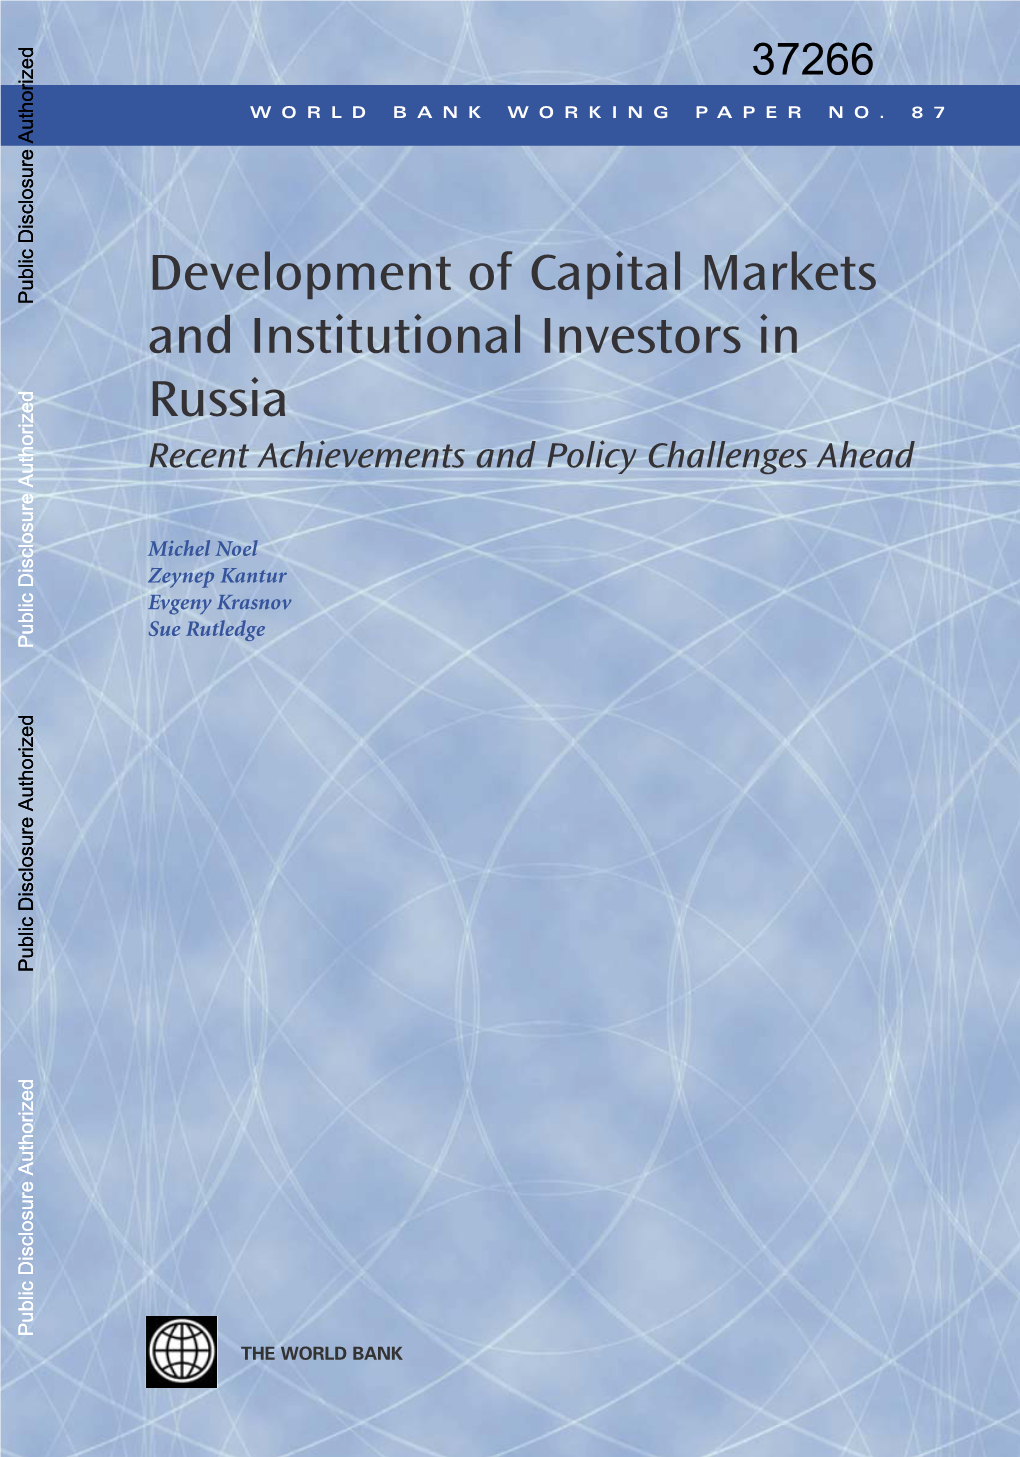 Development of Capital Markets and Institutional Investors in Russia Recent Achievements and Policy Challenges Ahead